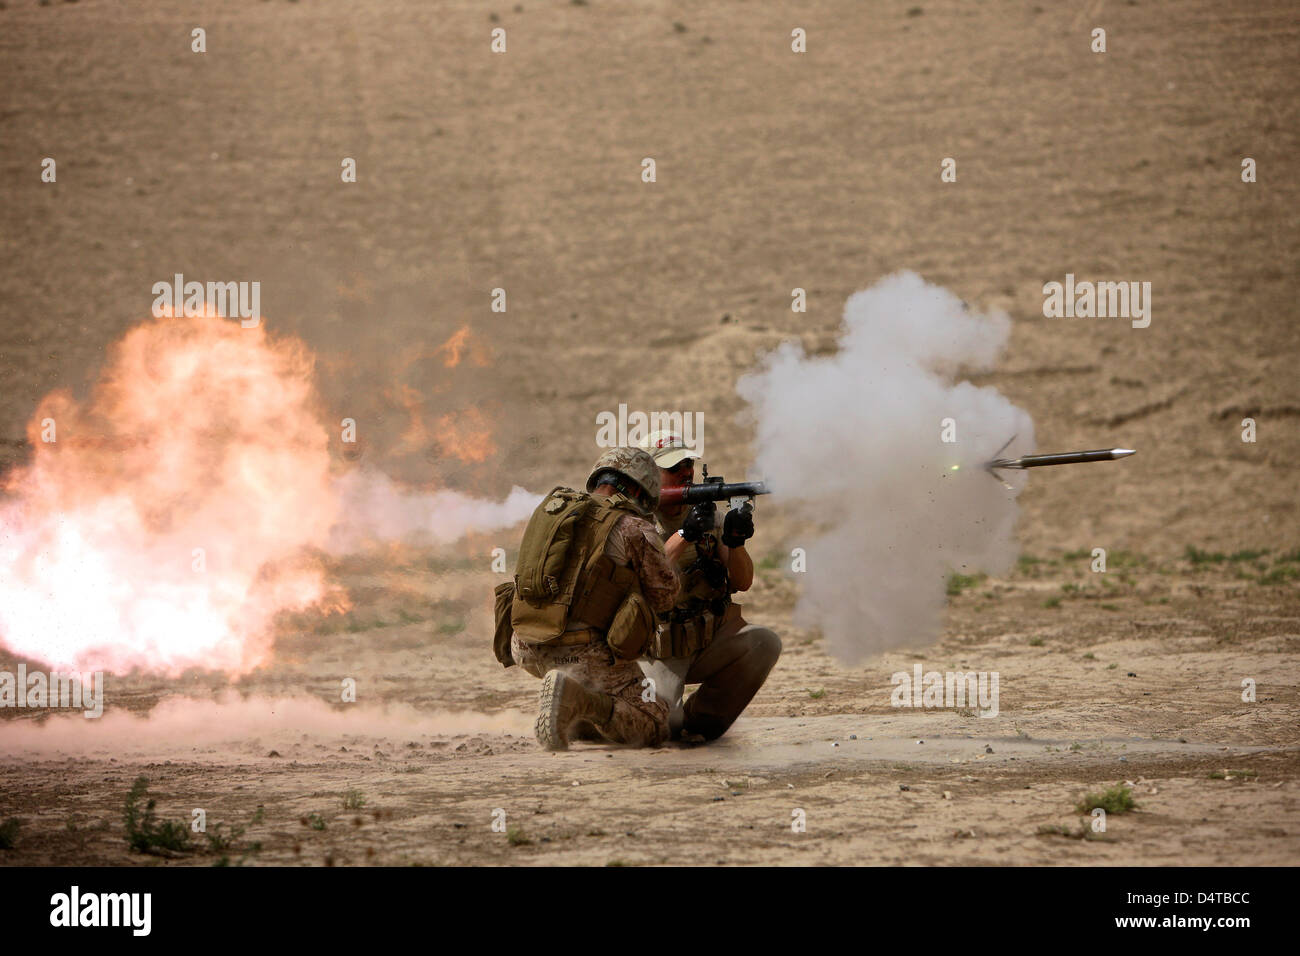 A U.S. Contractor fires a rocket-propelled grenade launcher. Stock Photo